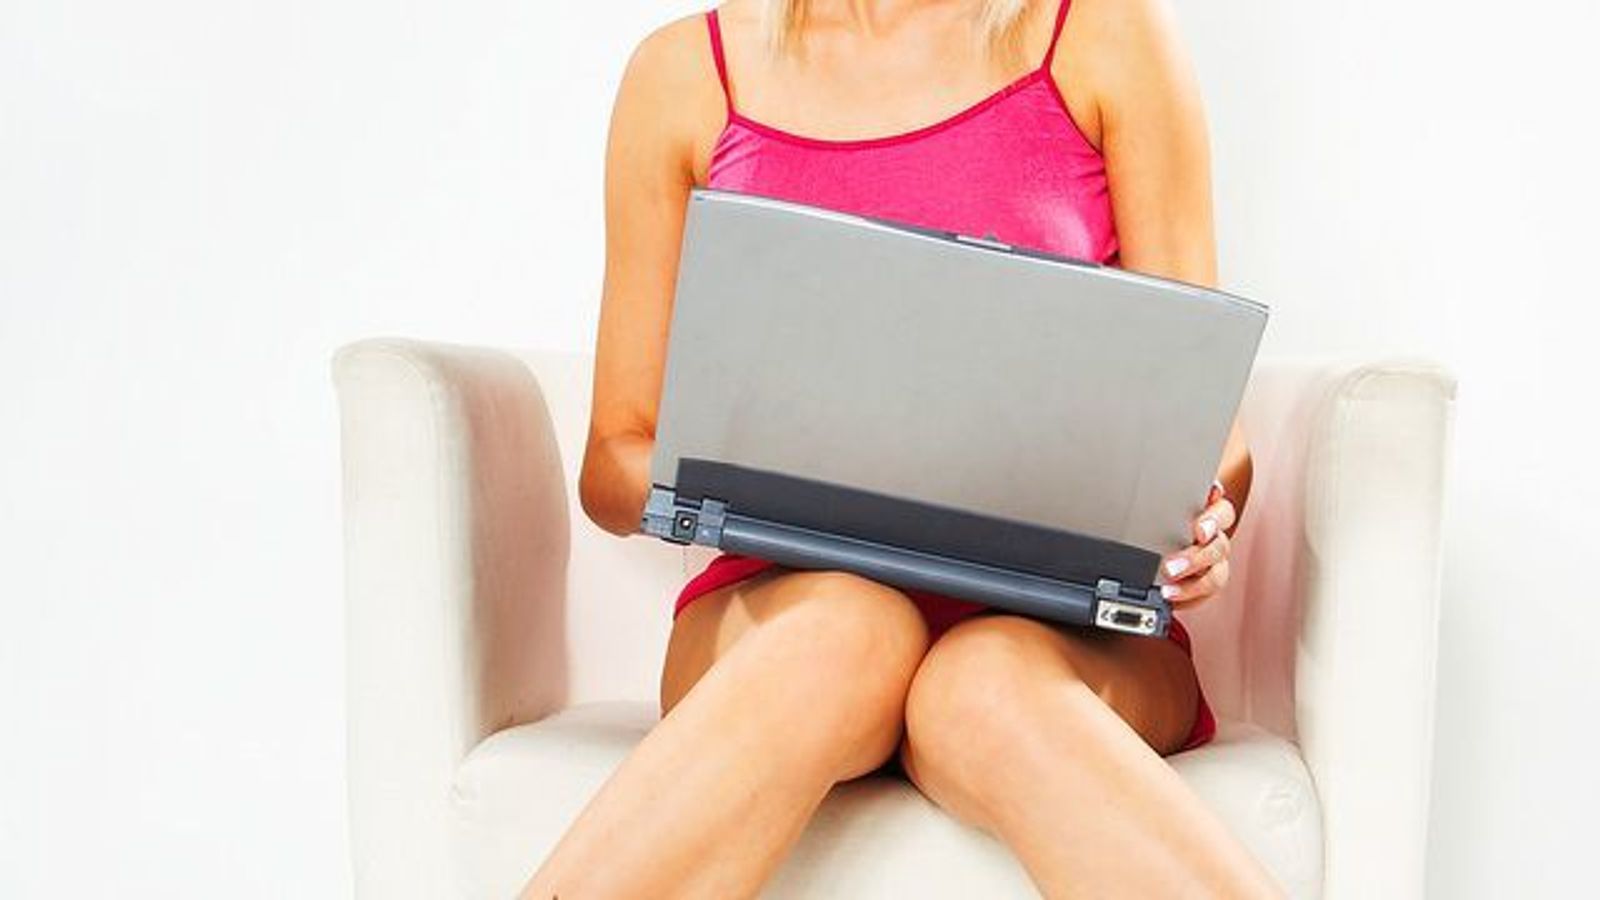 Adult Dating Sites Find Worldwide Audience